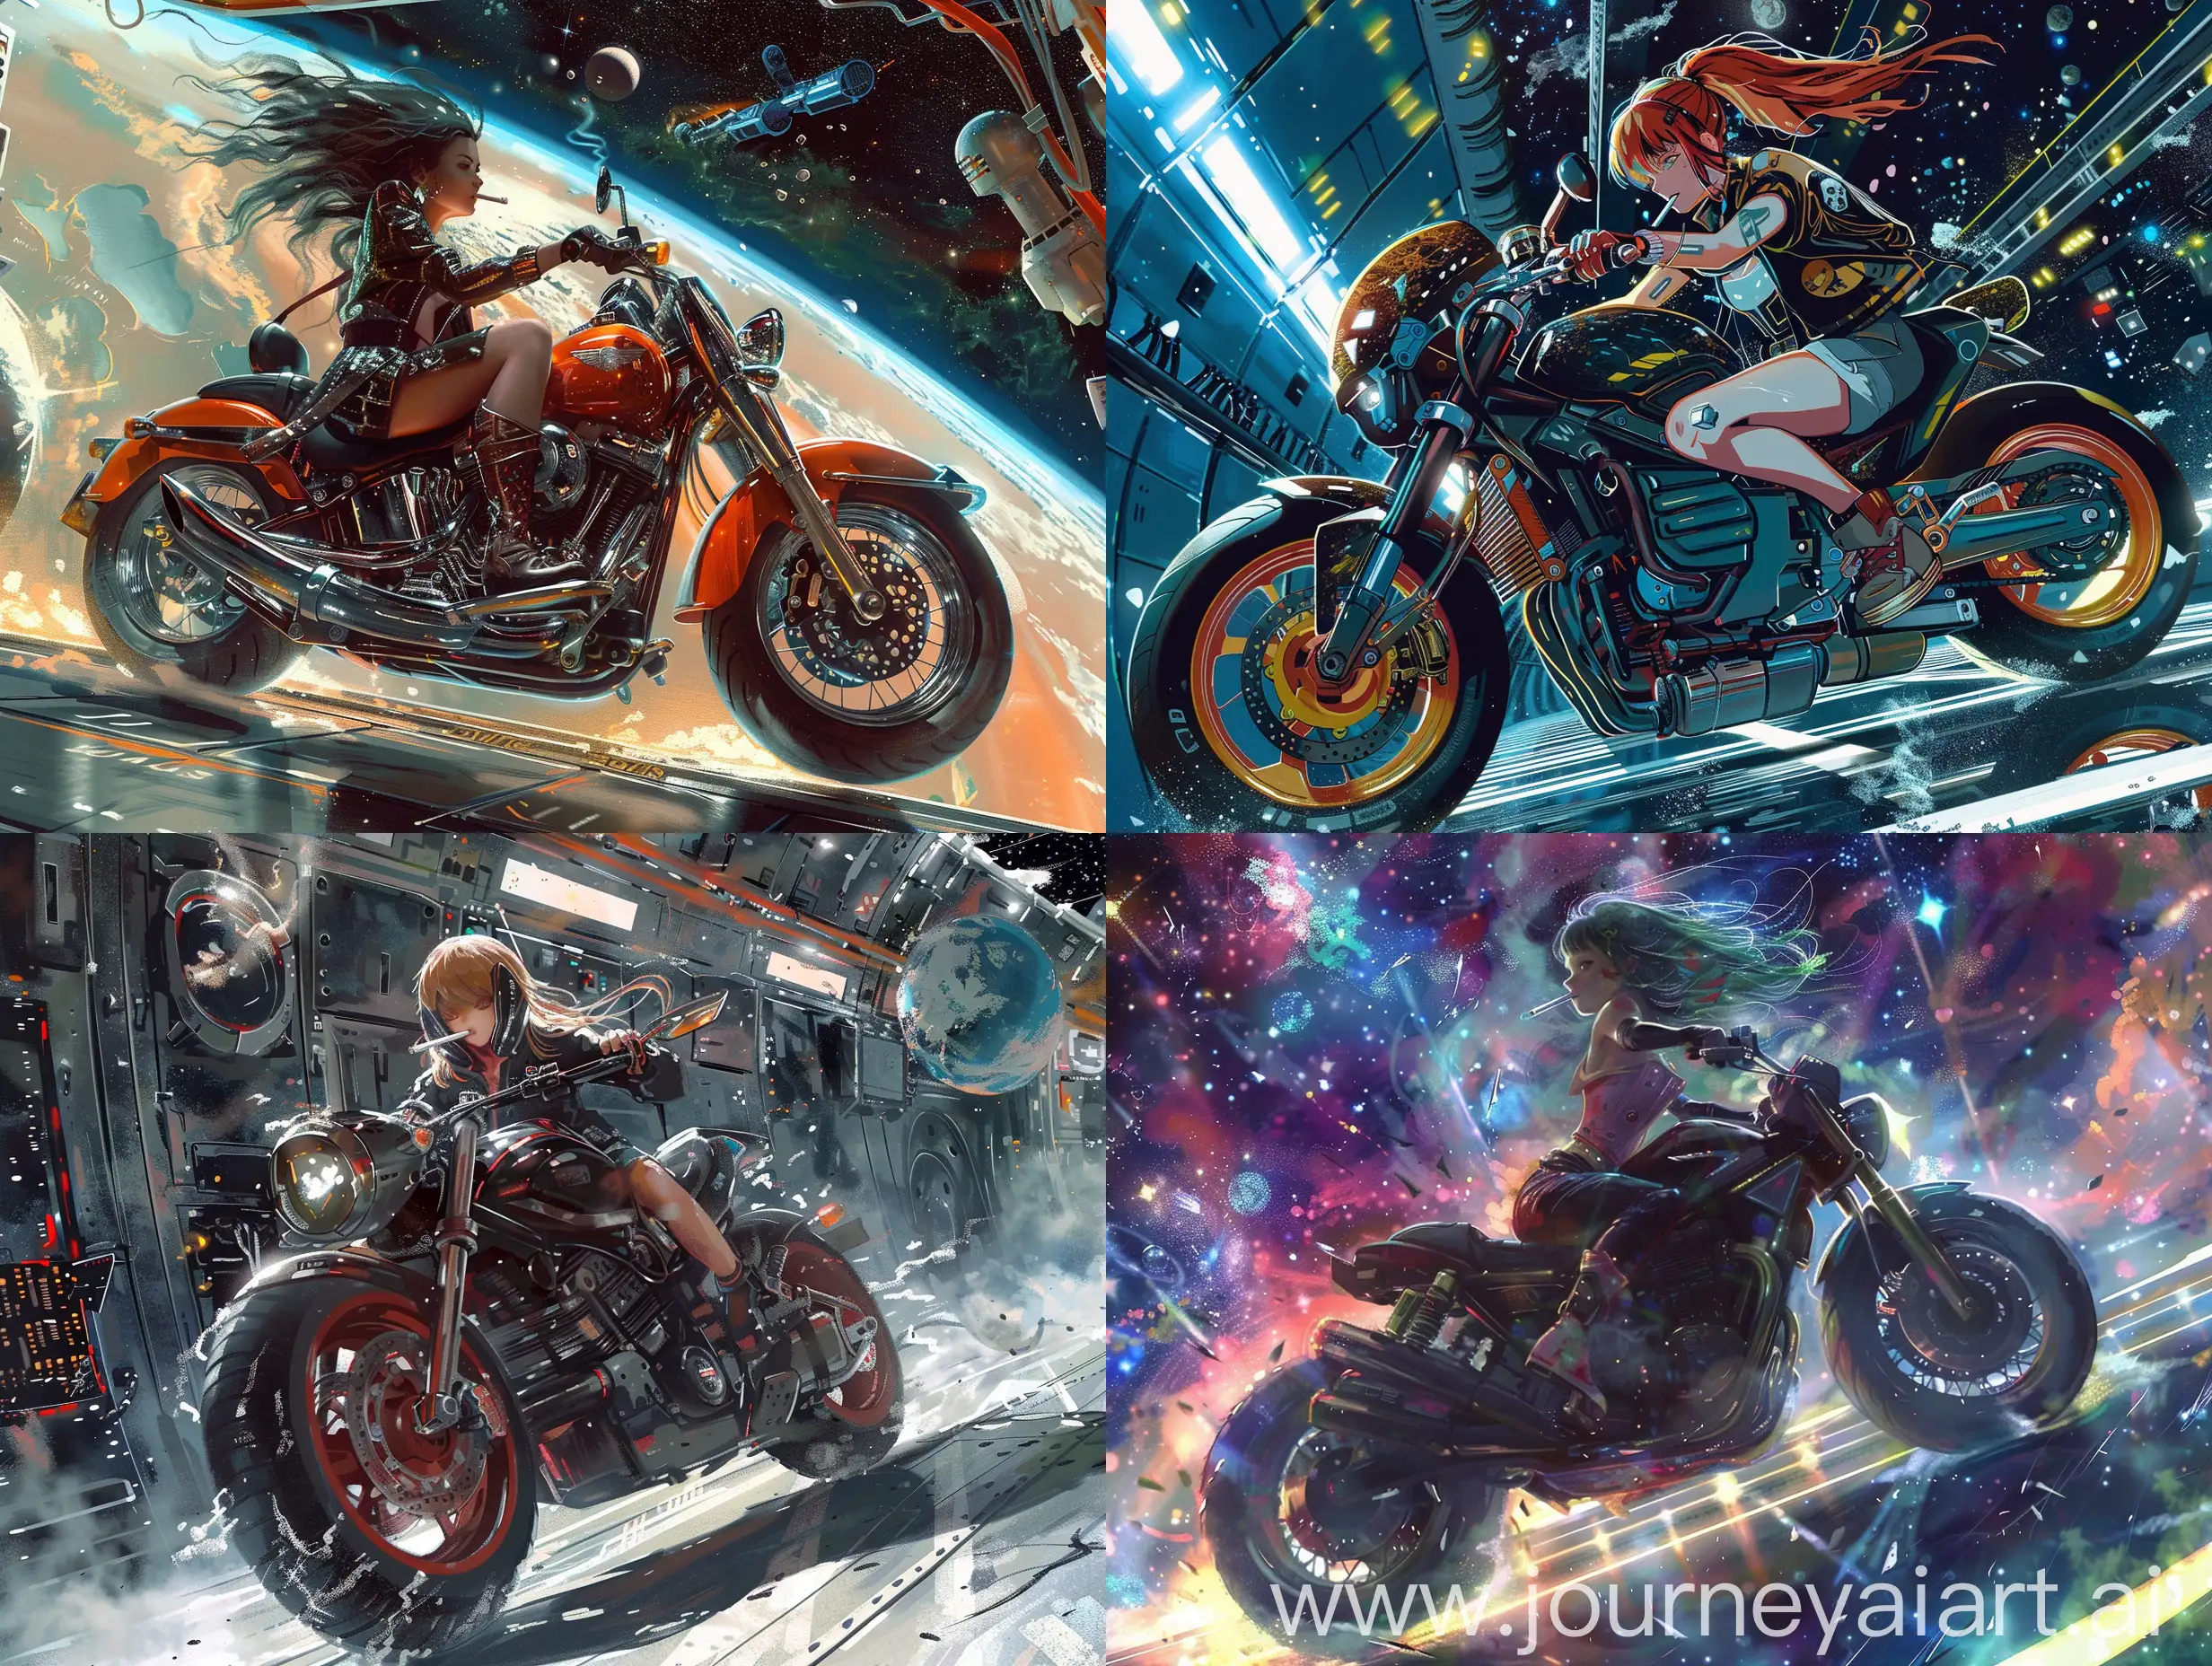 Futuristic-Space-Station-Motorcycle-Rider-with-a-Hint-of-Rebellion